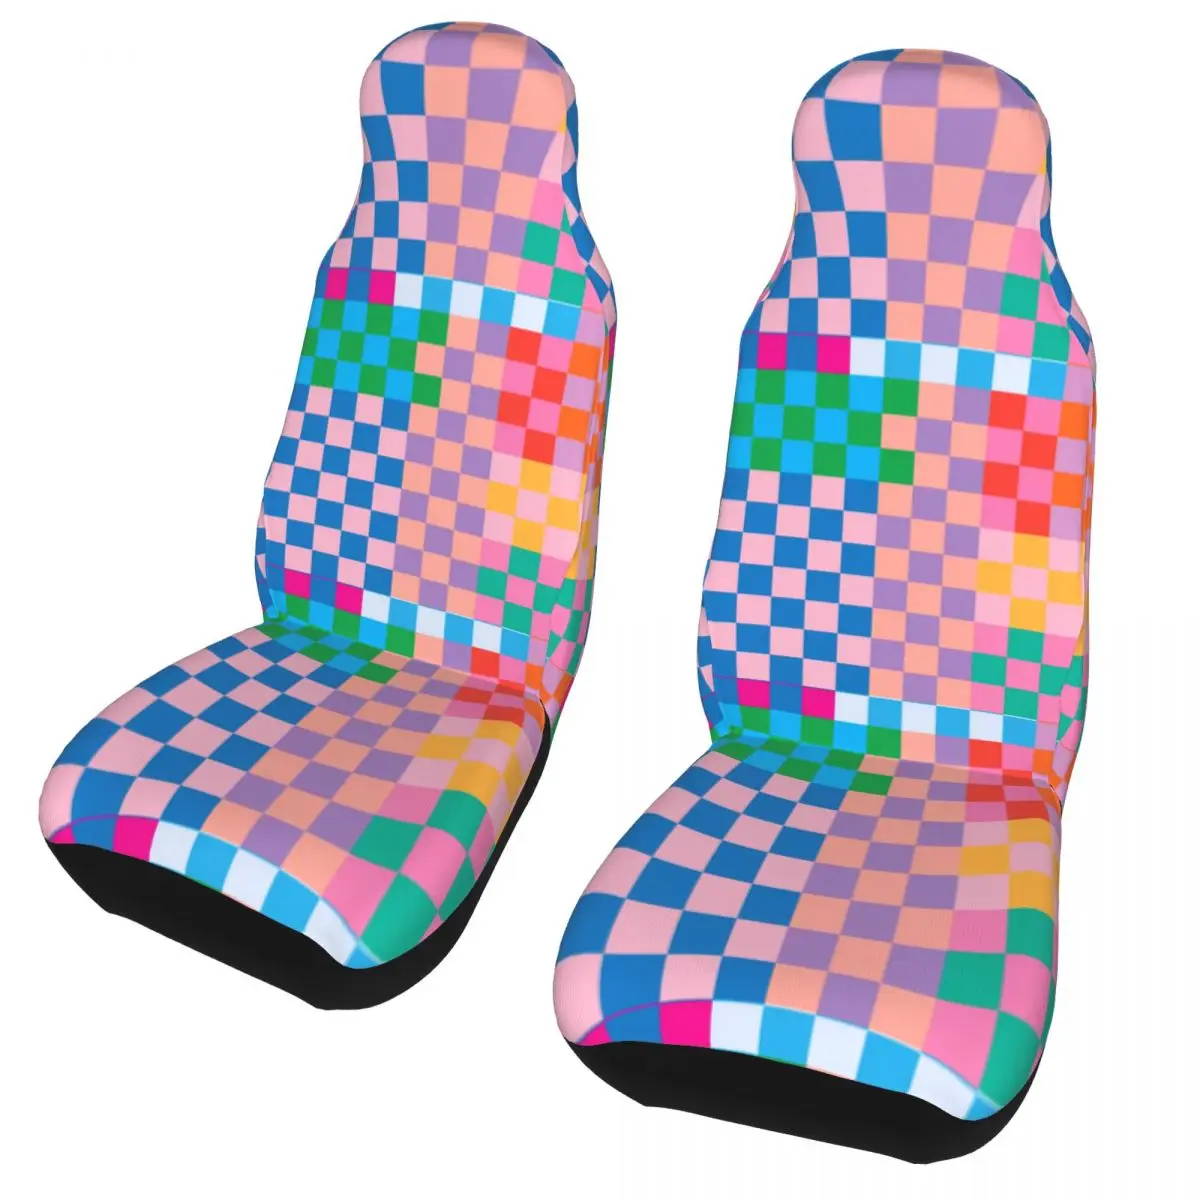 

Checkerboard Universal Car Seat Cover Auto Interior For All Kinds Models Pink and Black Car Seat Protector Polyester Fishing